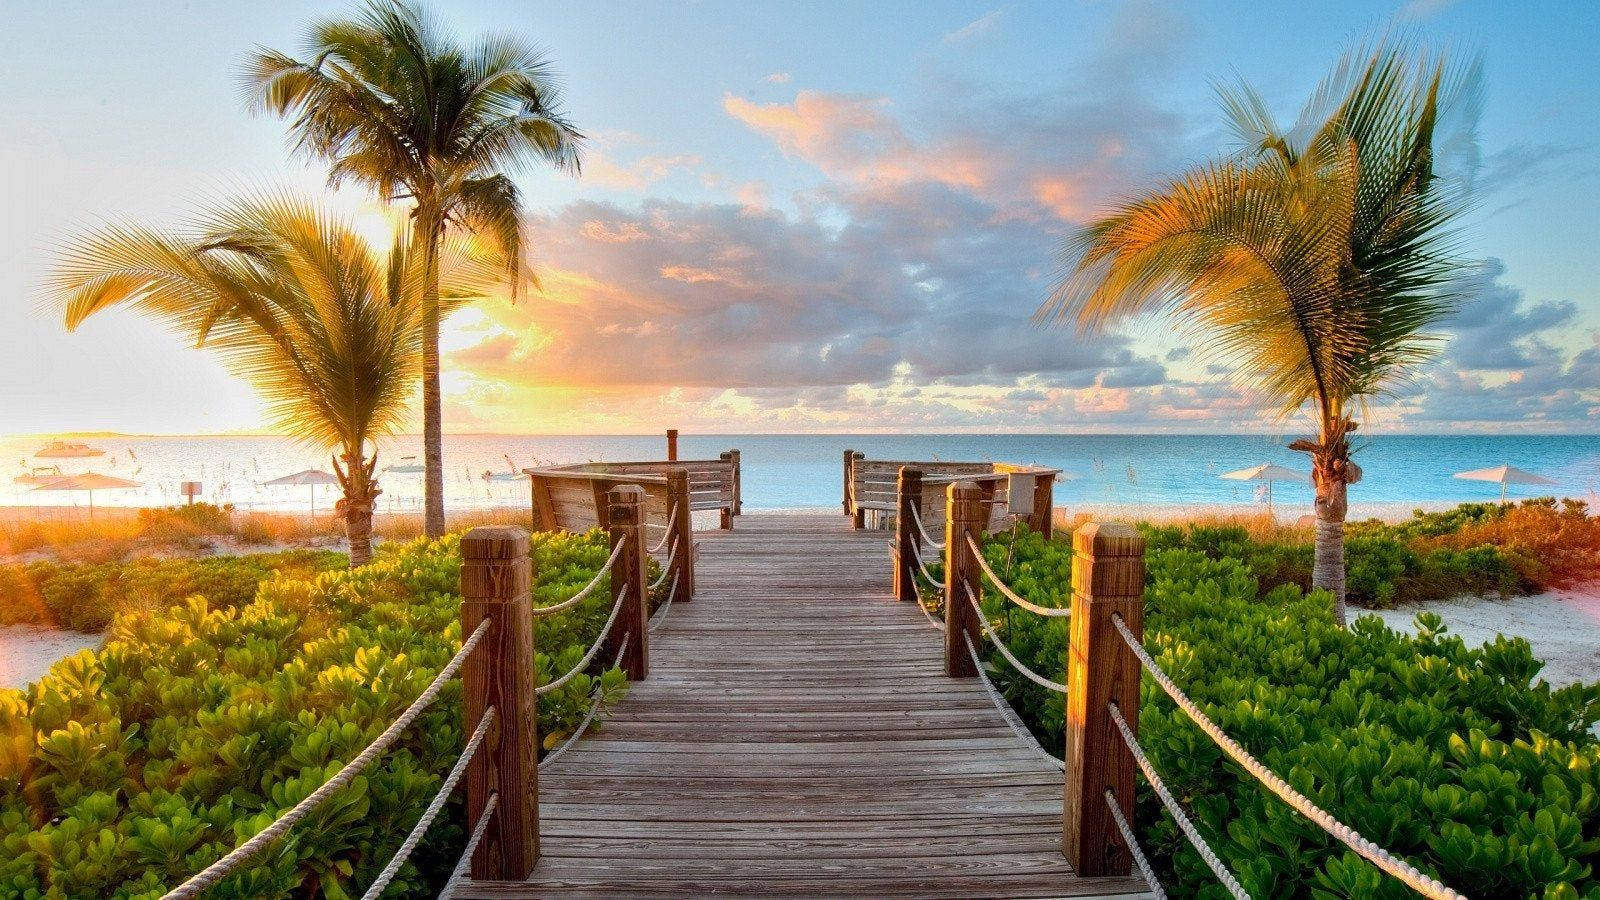 Wooden beach walkway leading up to an inviting horizon Wallpaper